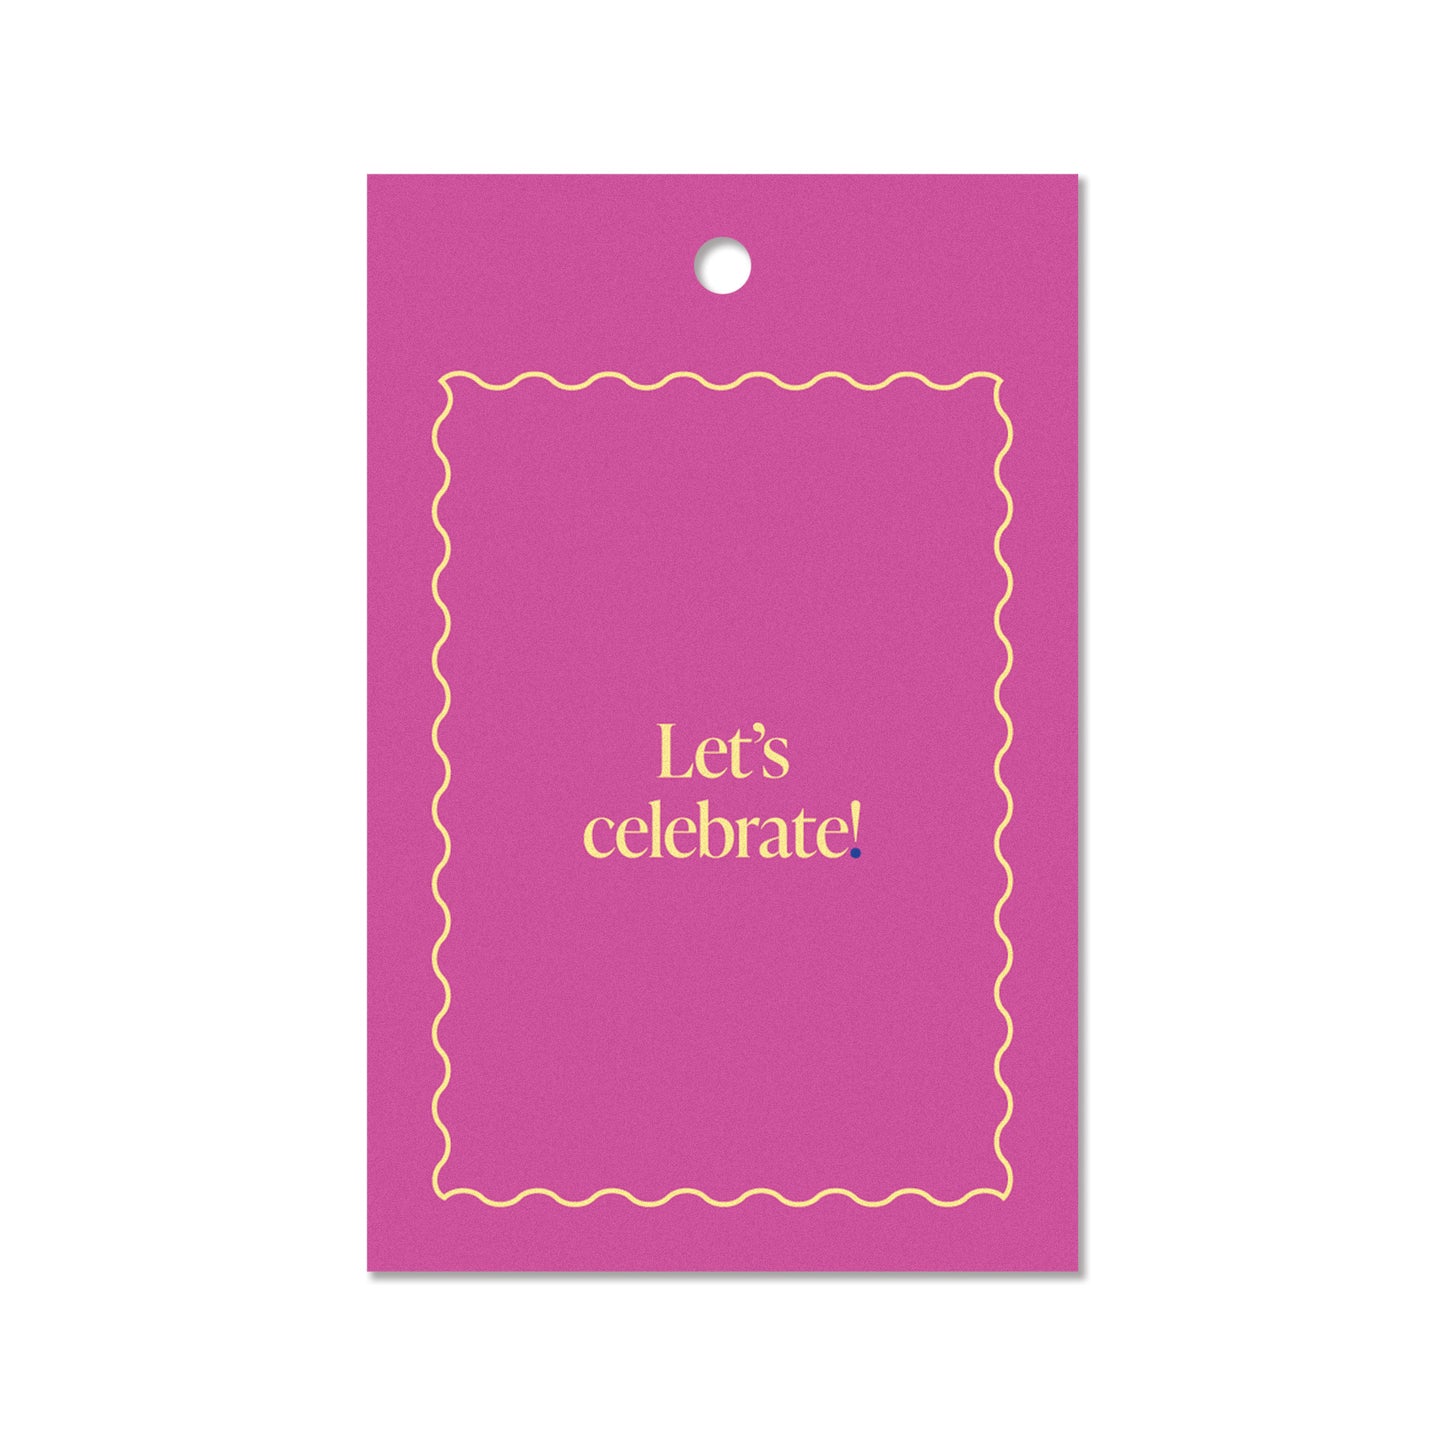 LET'S CELEBRATE! GIFT TAGS. (PACK OF 10)